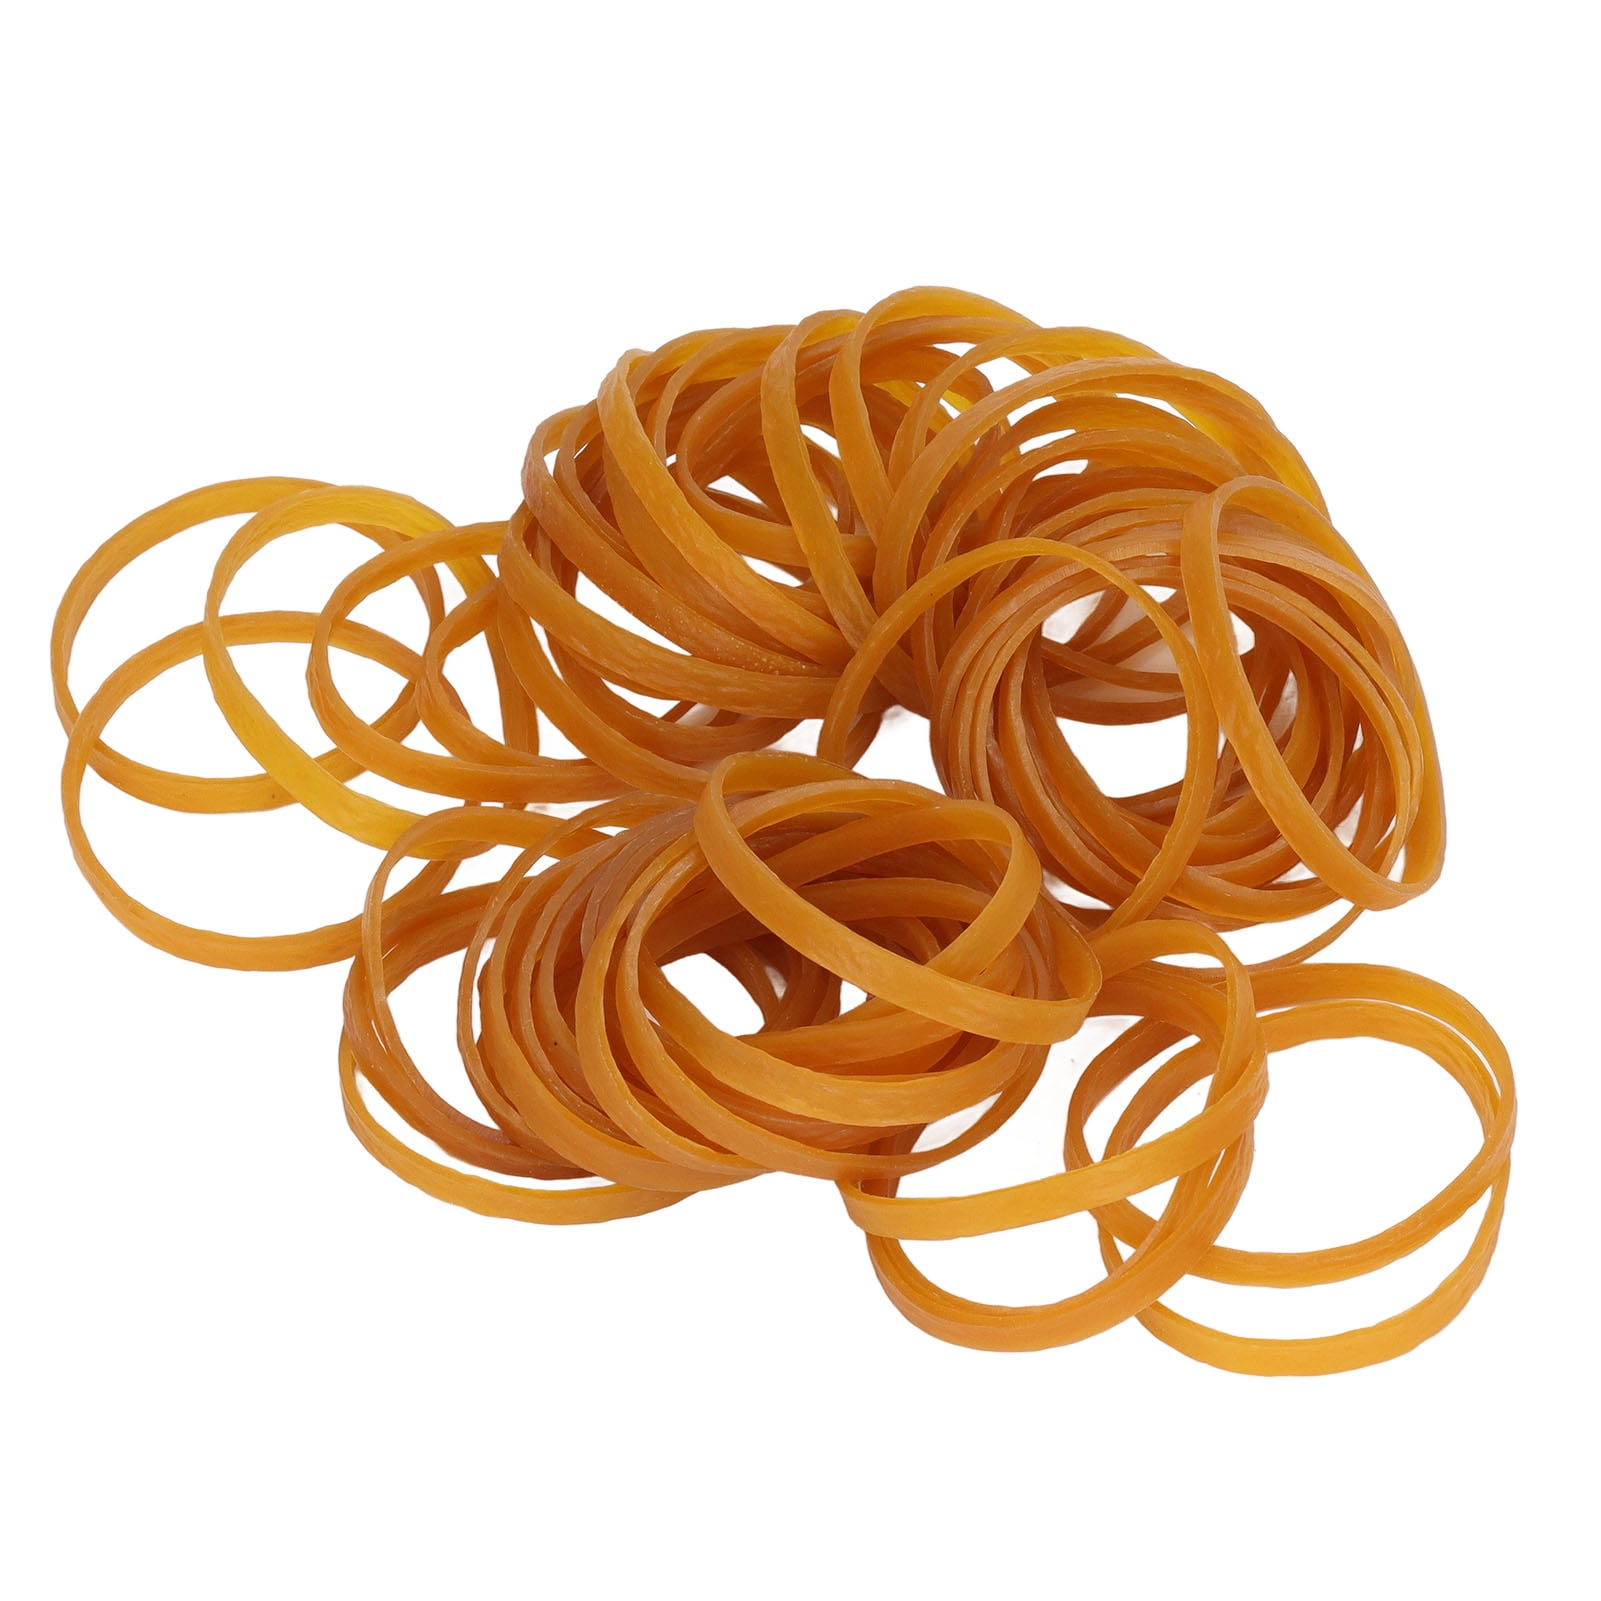 120 Pcs Rubber Bands Strong Elasticity High Toughness Industrial ...